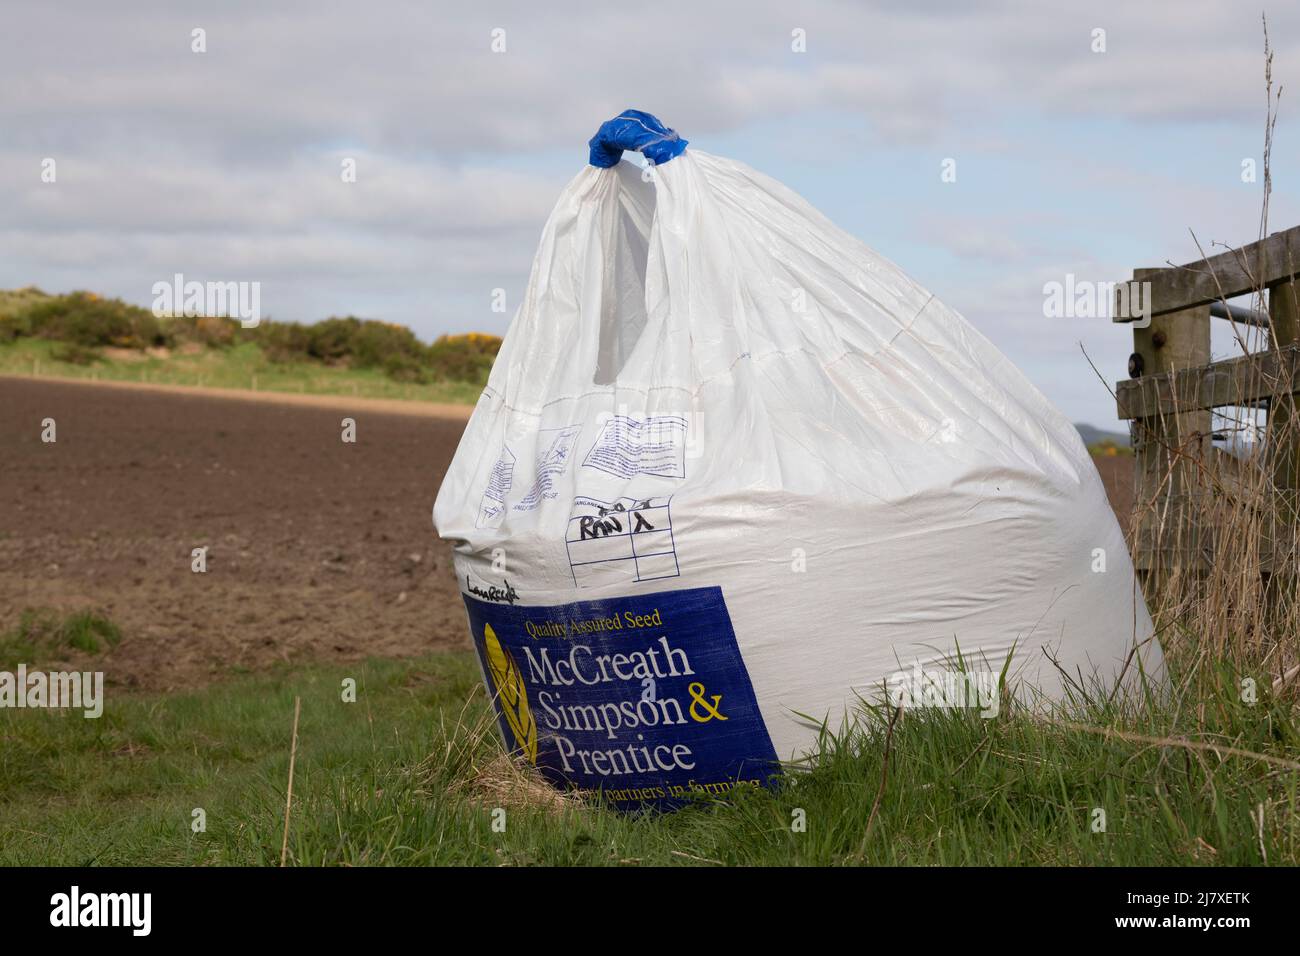 A Bag of Barley Seed at the Entrance to a Ploughed Field Ready for Sowing Stock Photo